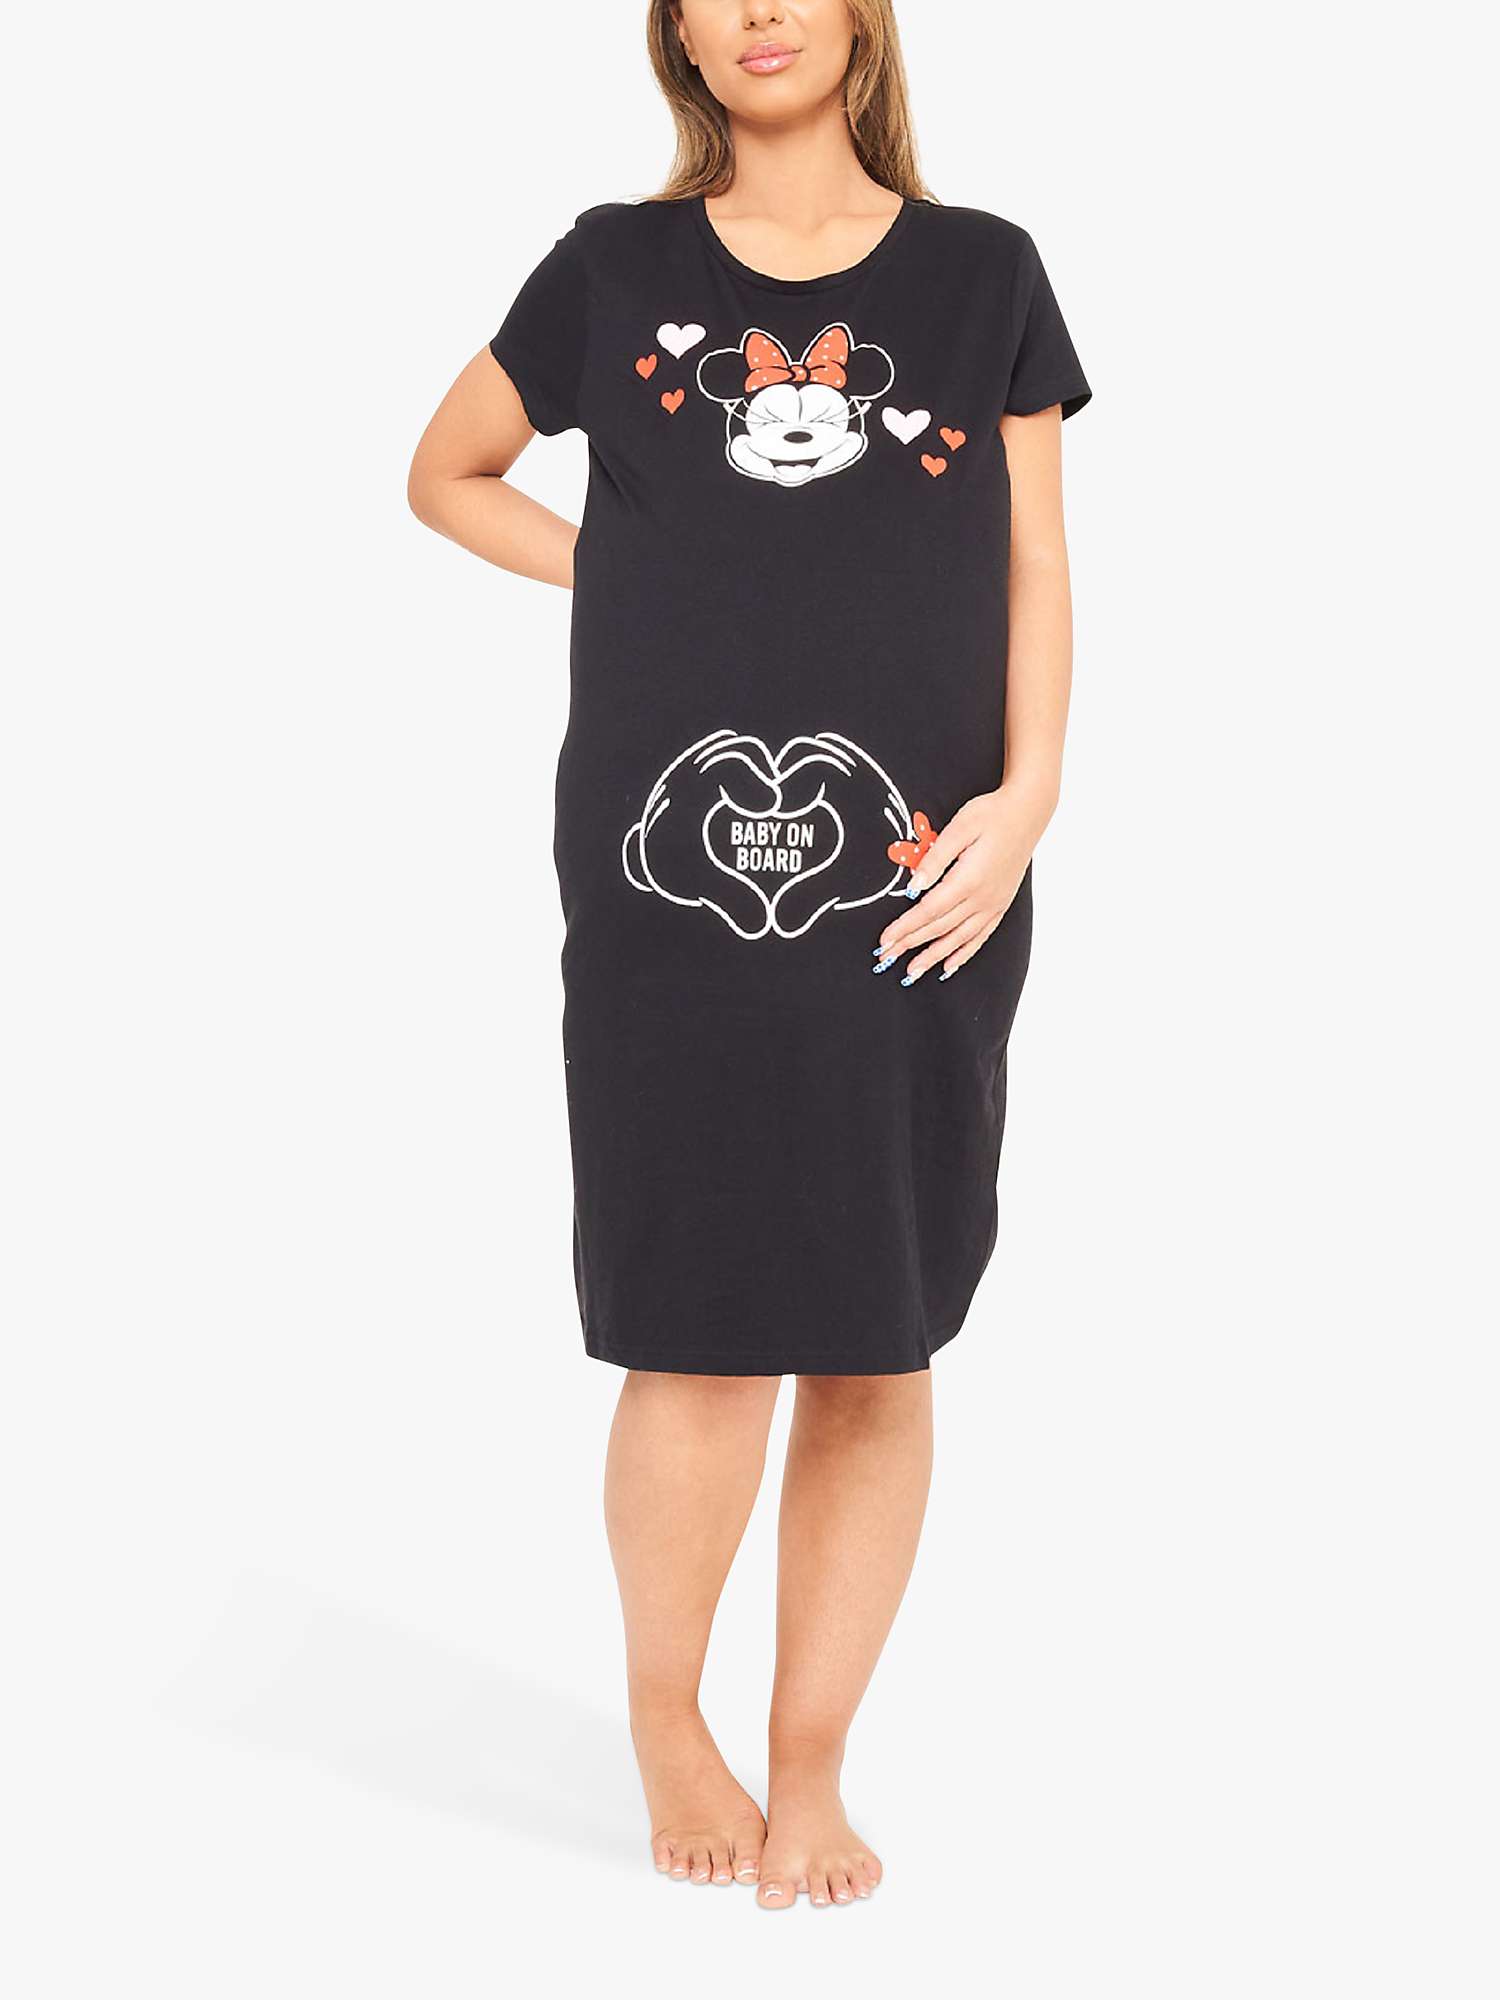 Buy Brand Threads Maternity Minnie Mouse Nightdress, Black Online at johnlewis.com